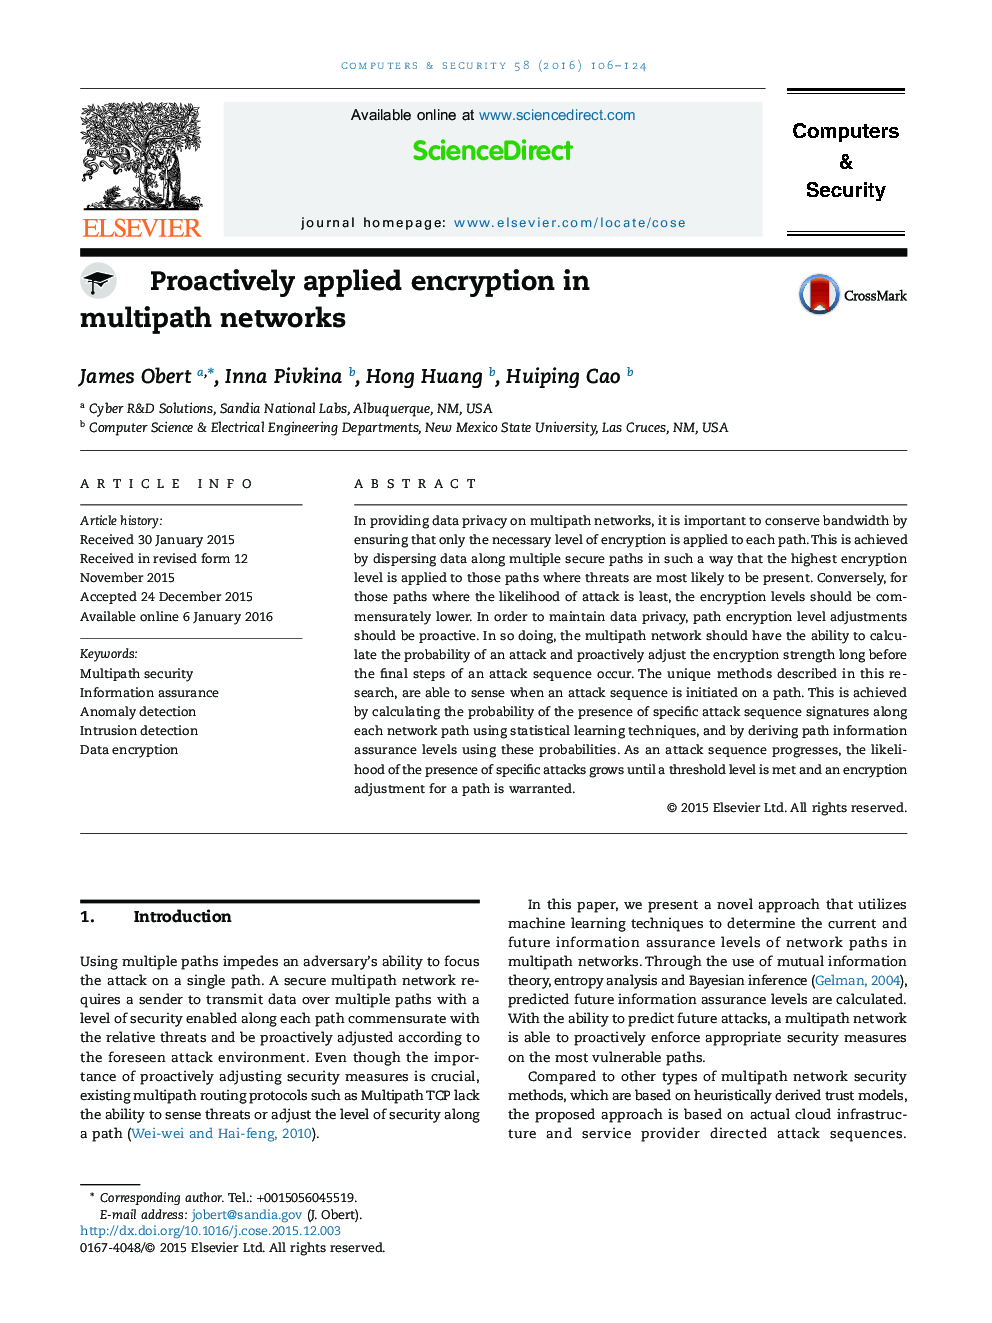 Proactively applied encryption in multipath networks